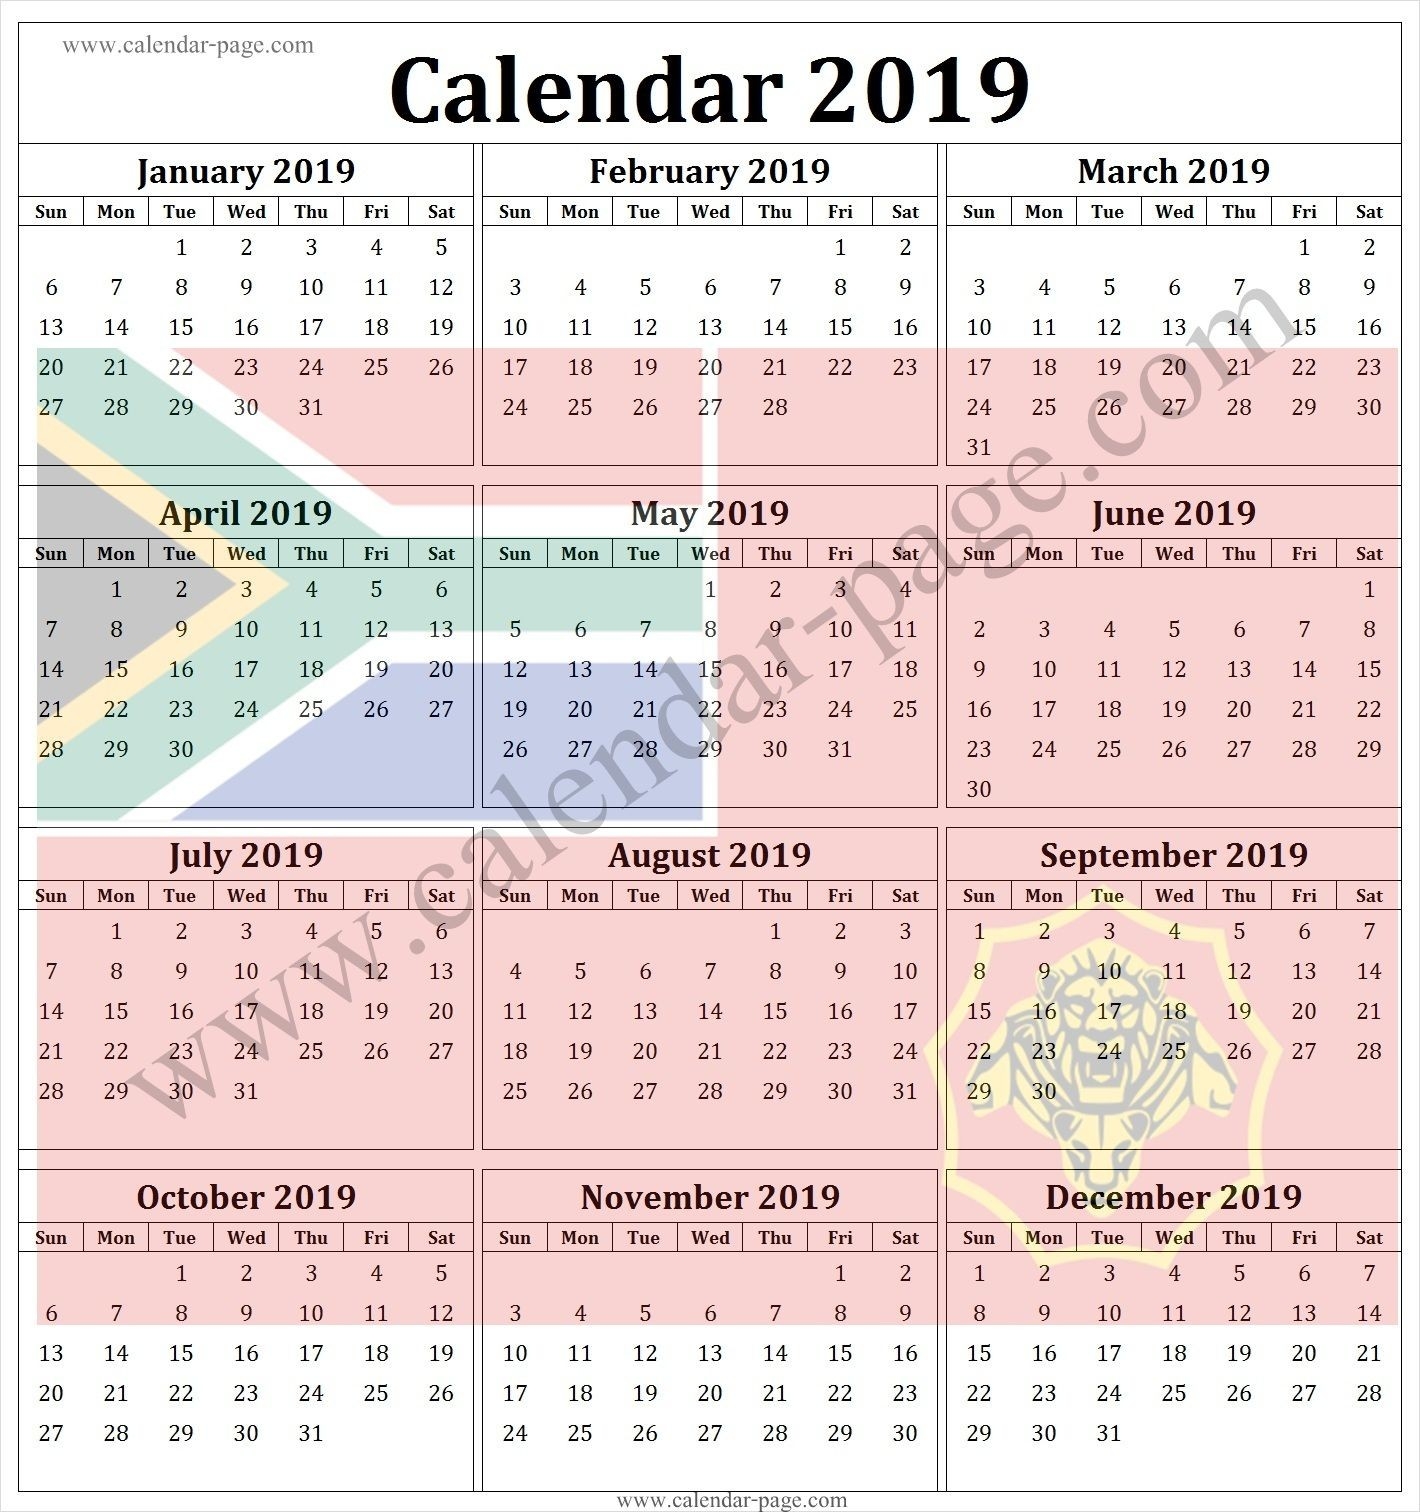 South Africa 2019 Calendar With Public Holidays | Calendar-South African Calendar With Public Holidays